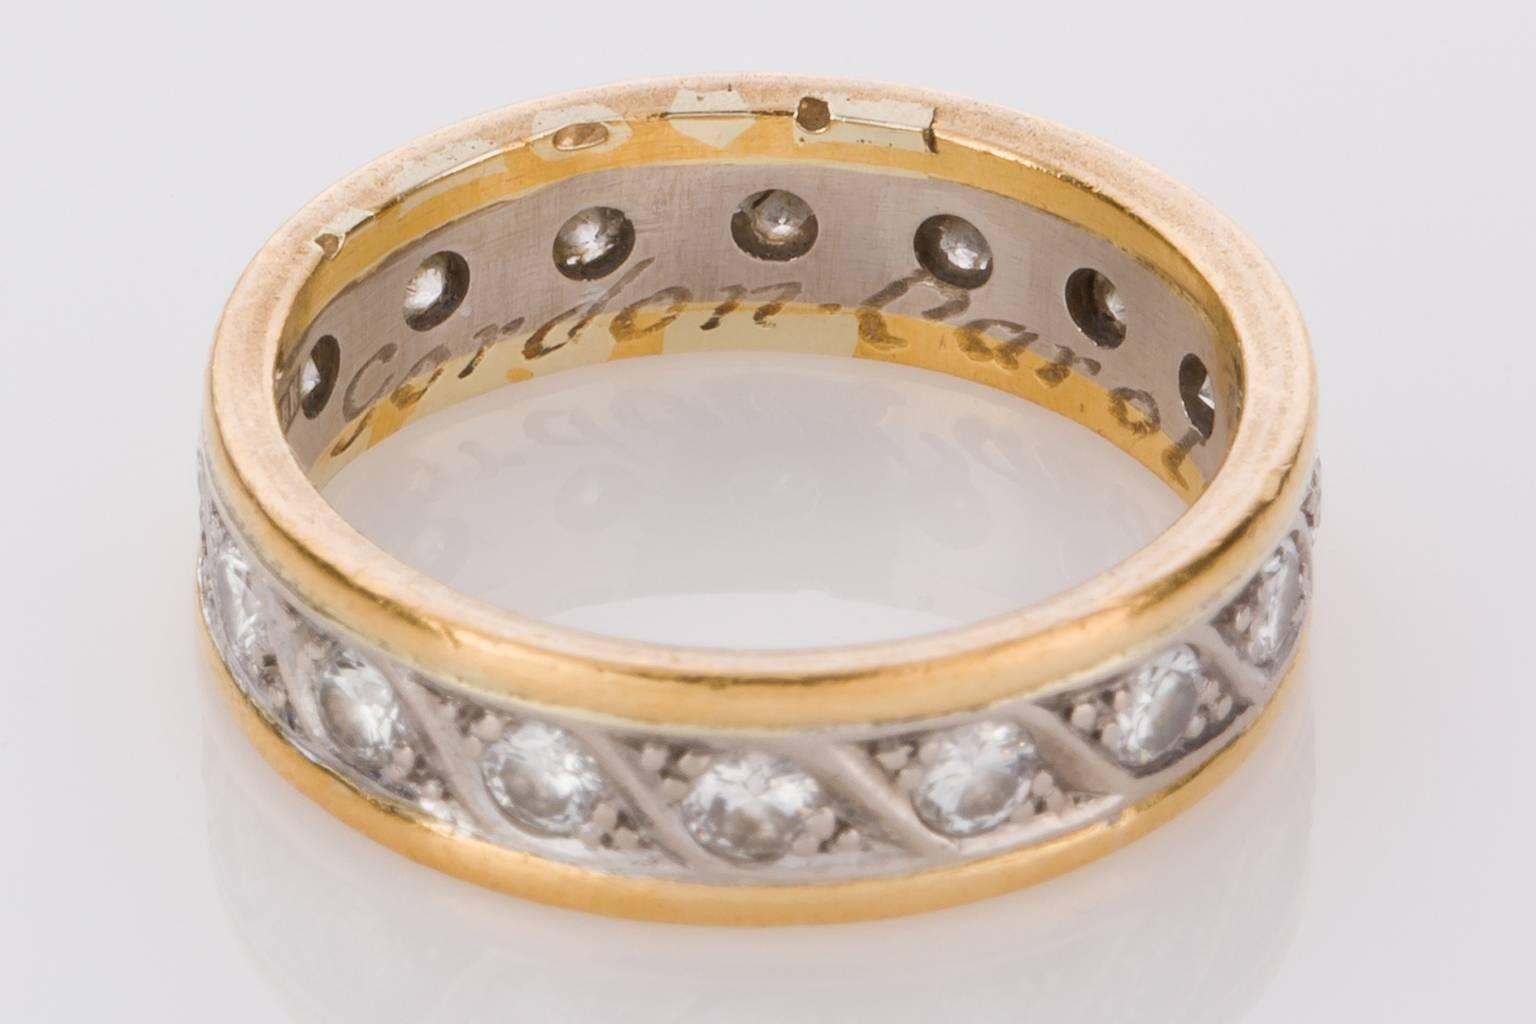 A lovely old two tone 18k white and yellow gold never-ending band set with 16 round brilliant cut diamonds weighing approximately 0.80cts. The diamond set centre of the ring is 18k white gold with a swirl pattern between each diamond with outer